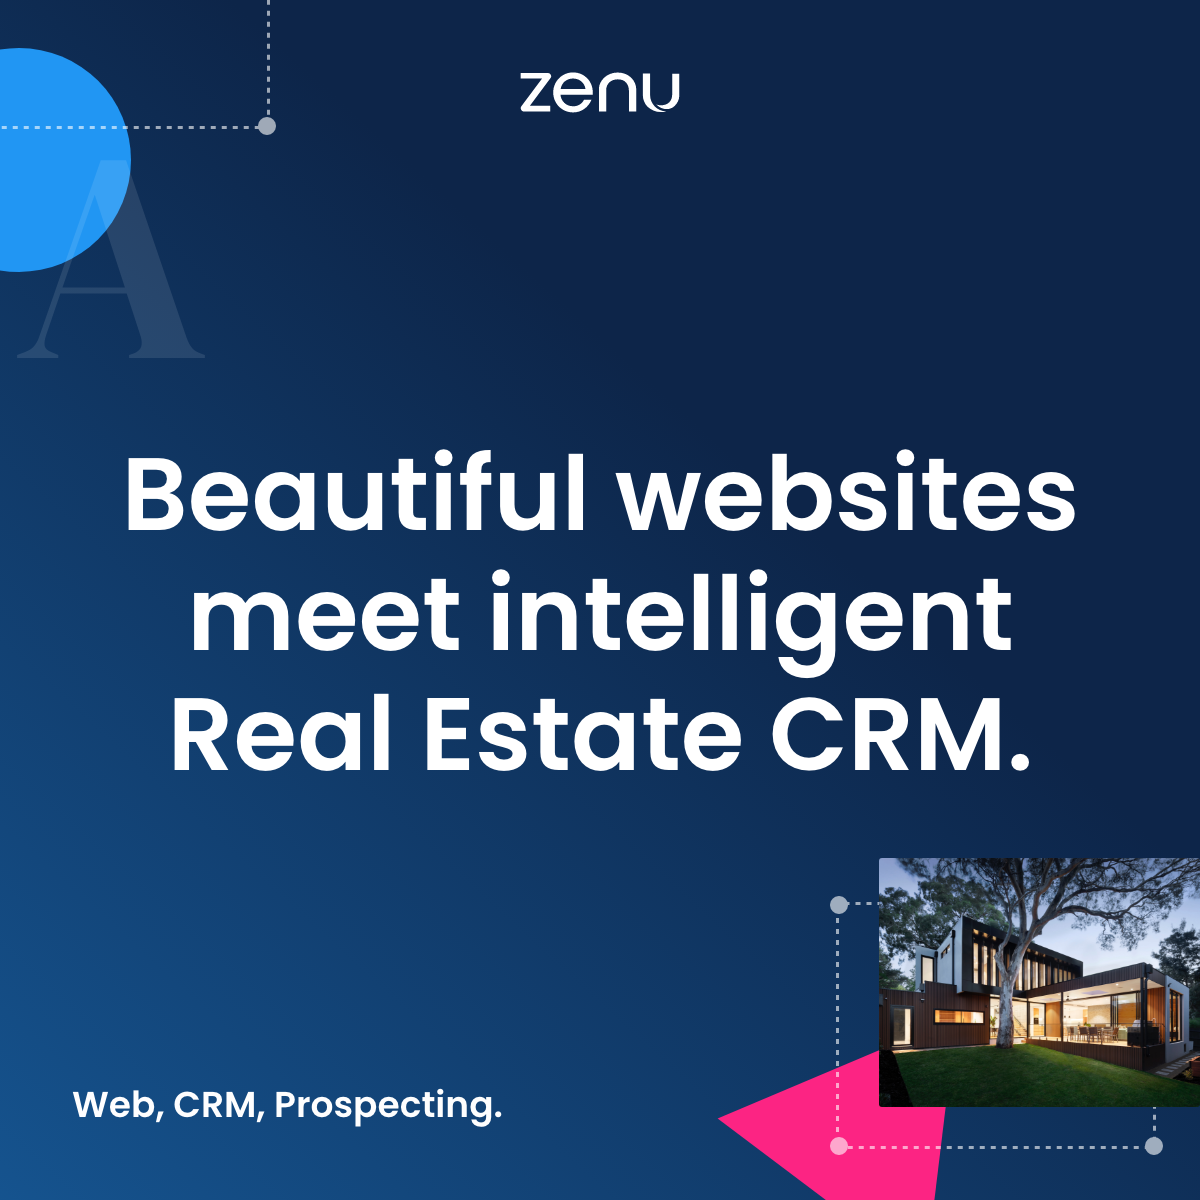 What Are Agent Tools? The Importance of a Dedicated CRM for Real Estate Agents